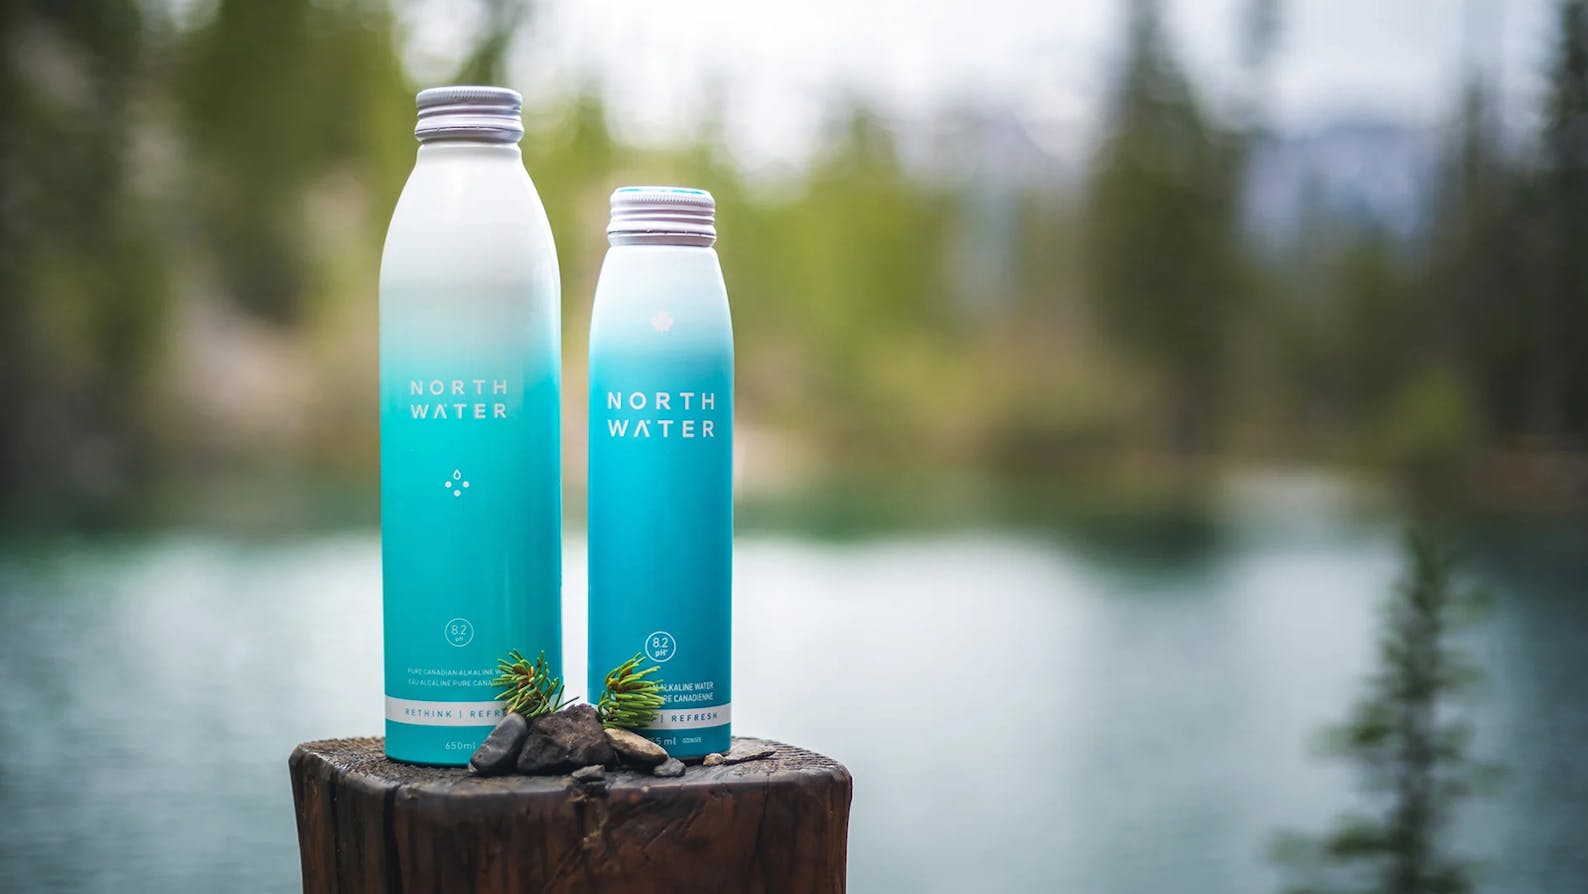 Dial distributes body wash in '100% recycled' plastic bottles in